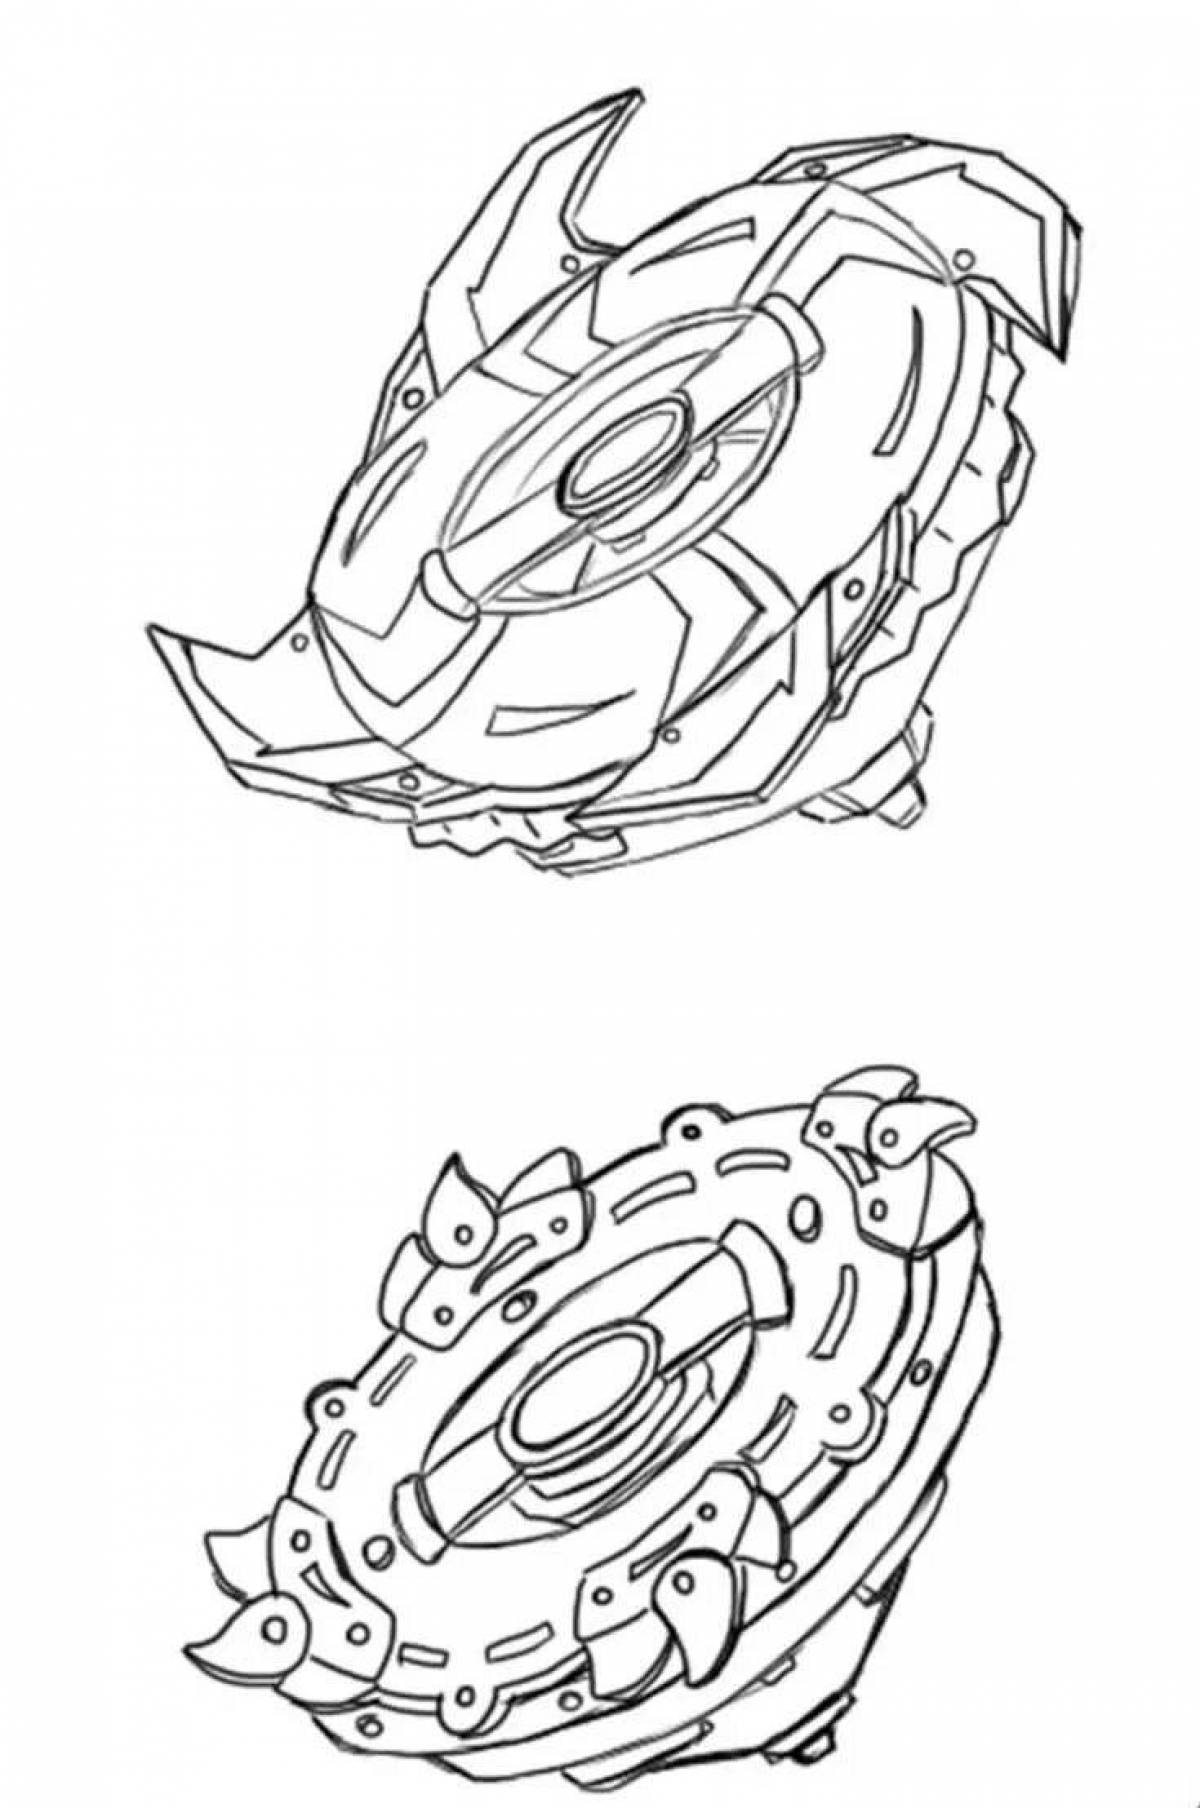 Charming beyblade coloring book